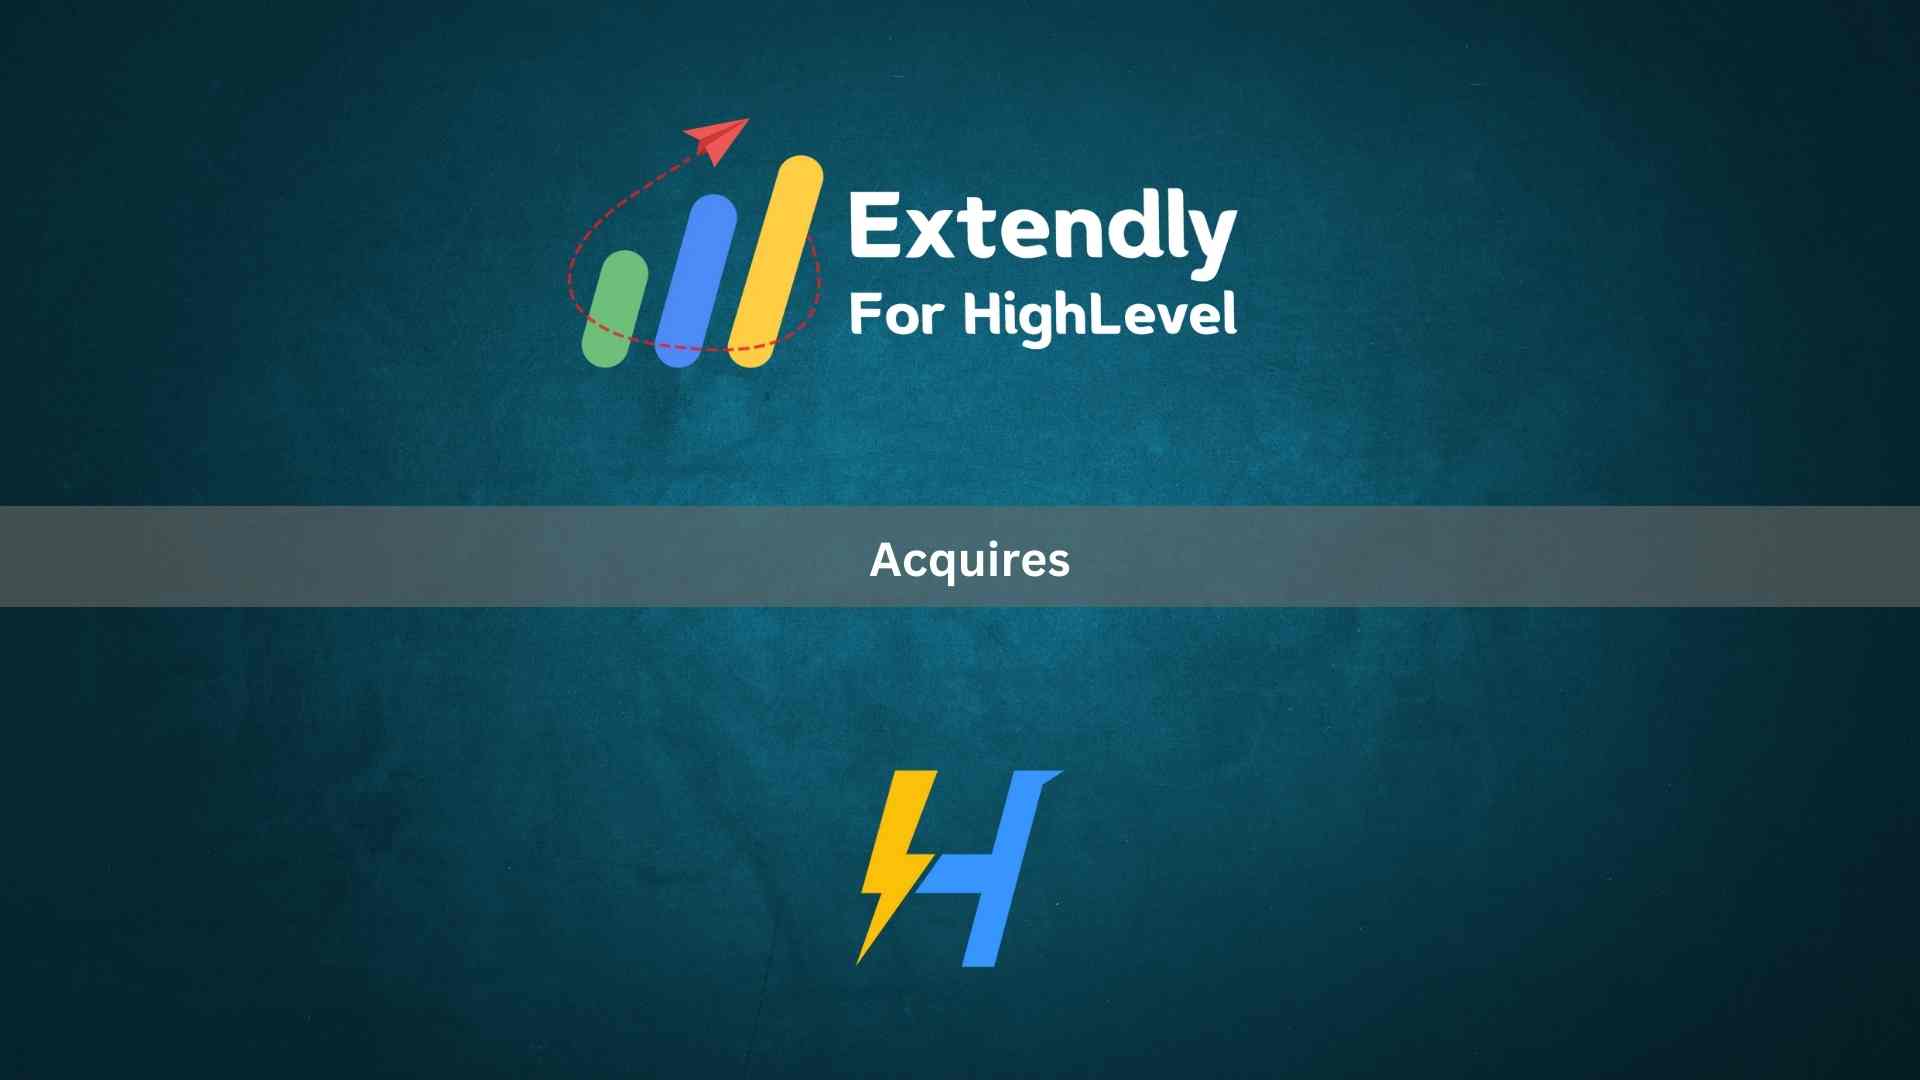 Extendly Acquires SaaS Boltons to Empower HighLevel Users and SaaS Businesses